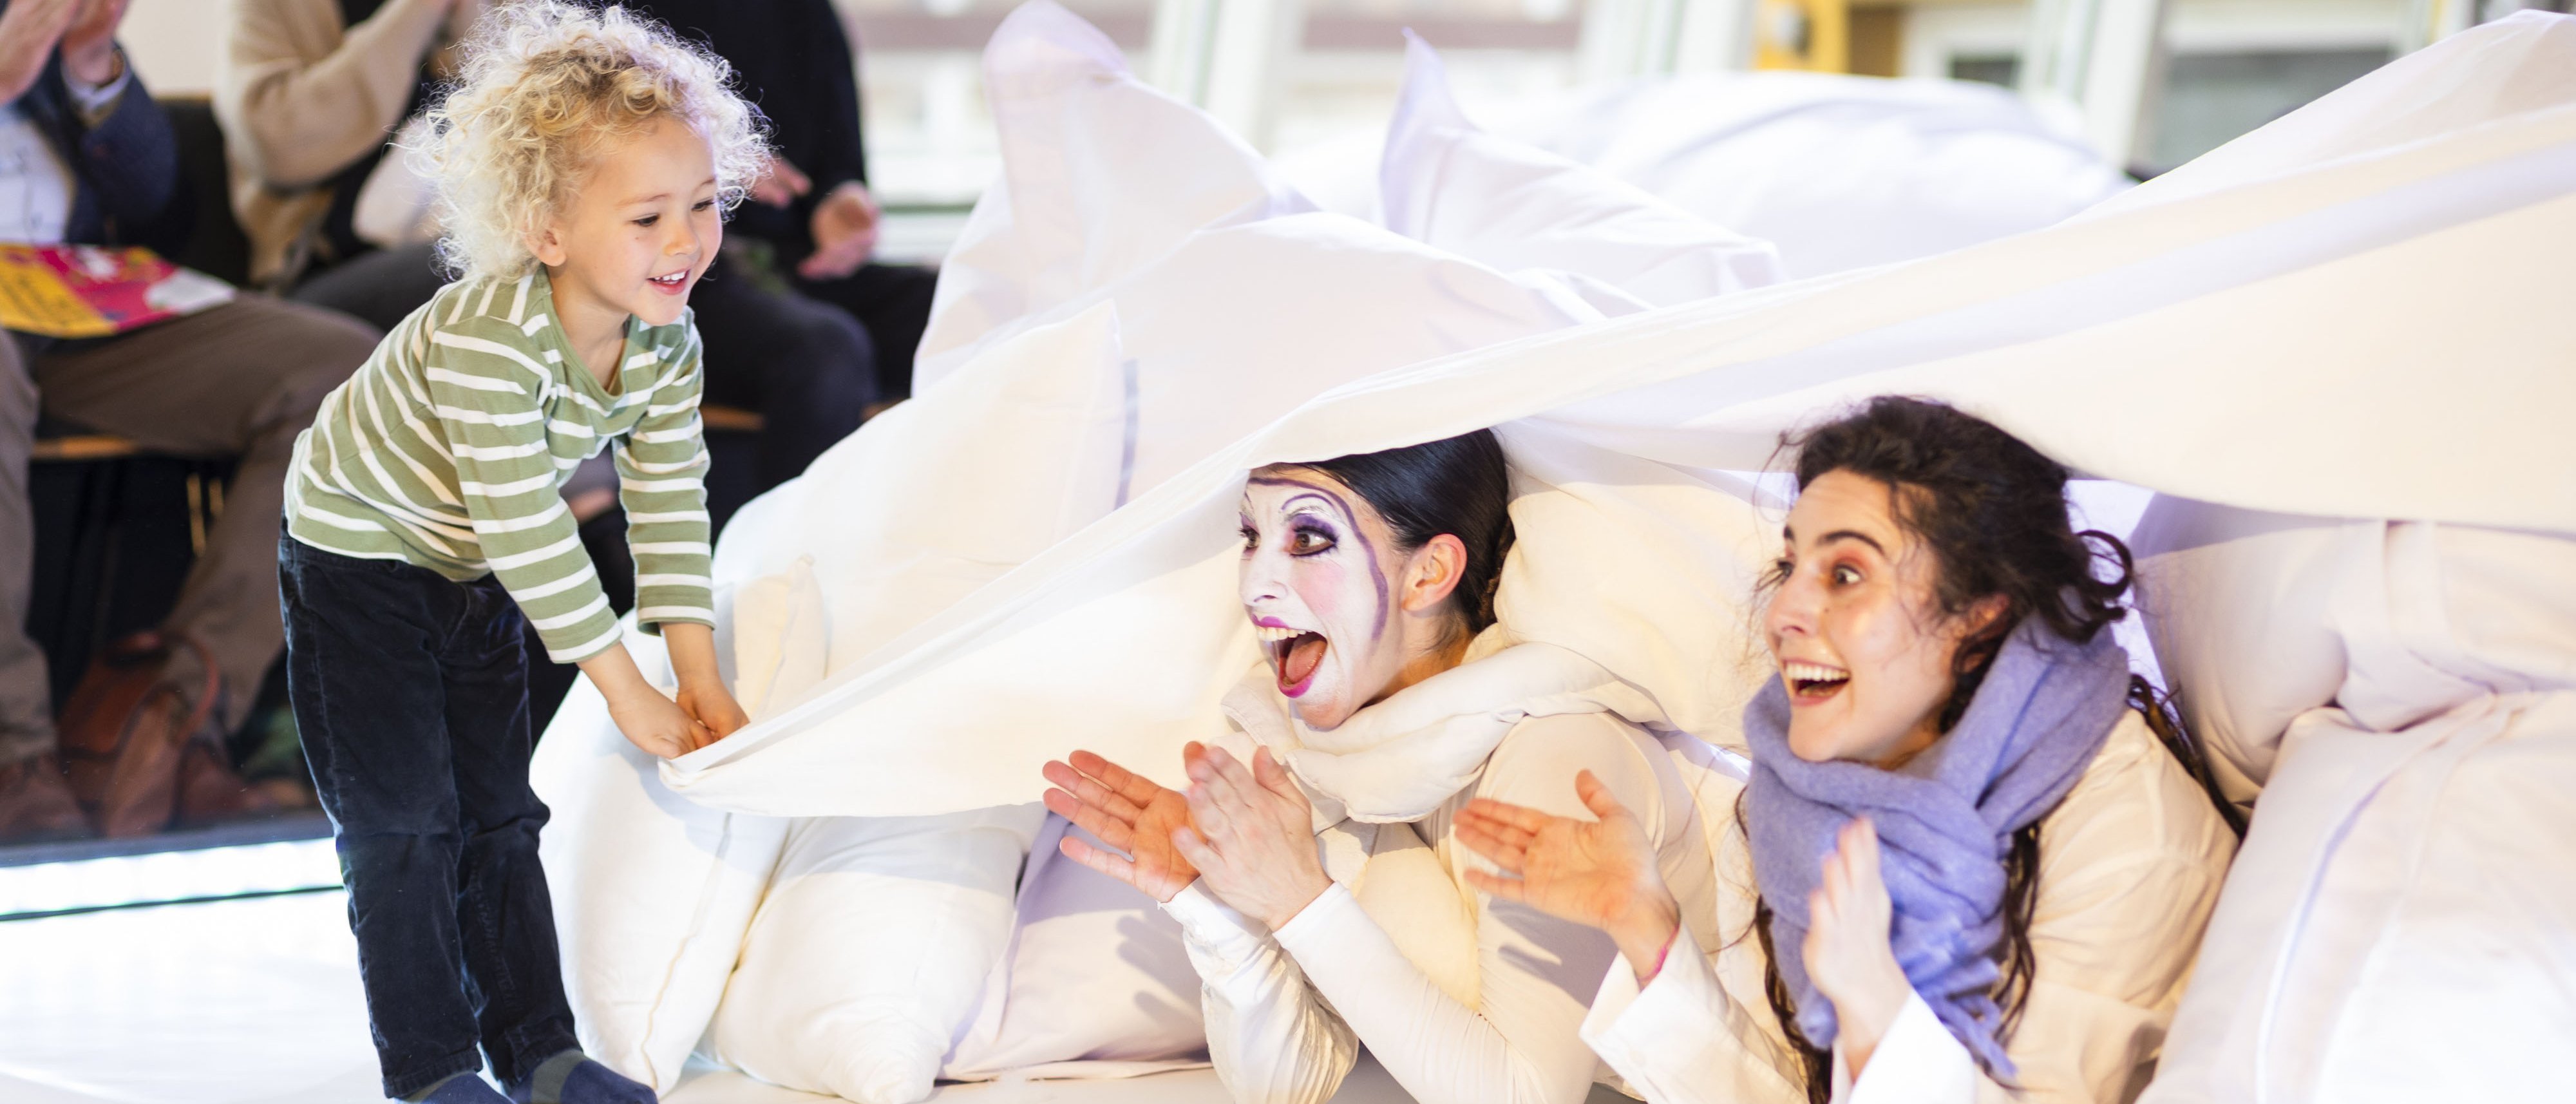 Child lifts up a blanket, two women with colourful make-up lie underneath and look surprised